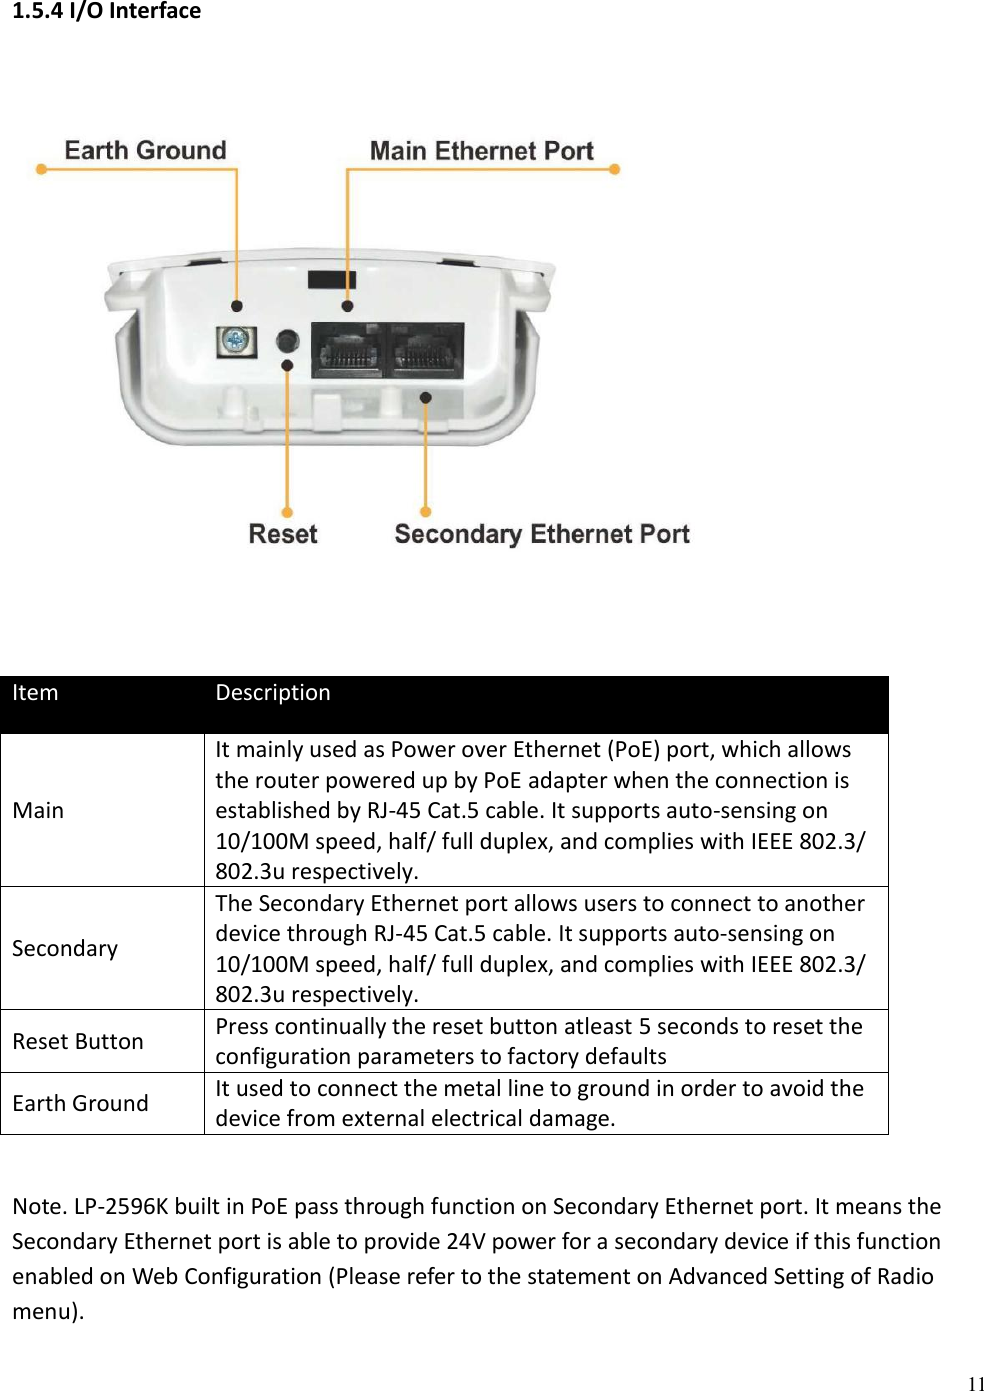 11  1.5.4 I/O Interface   Item Description Main It mainly used as Power over Ethernet (PoE) port, which allows the router powered up by PoE adapter when the connection is established by RJ-45 Cat.5 cable. It supports auto-sensing on 10/100M speed, half/ full duplex, and complies with IEEE 802.3/ 802.3u respectively. Secondary The Secondary Ethernet port allows users to connect to another device through RJ-45 Cat.5 cable. It supports auto-sensing on 10/100M speed, half/ full duplex, and complies with IEEE 802.3/ 802.3u respectively. Reset Button Press continually the reset button atleast 5 seconds to reset the configuration parameters to factory defaults Earth Ground It used to connect the metal line to ground in order to avoid the device from external electrical damage.  Note. LP-2596K built in PoE pass through function on Secondary Ethernet port. It means the Secondary Ethernet port is able to provide 24V power for a secondary device if this function enabled on Web Configuration (Please refer to the statement on Advanced Setting of Radio menu). 